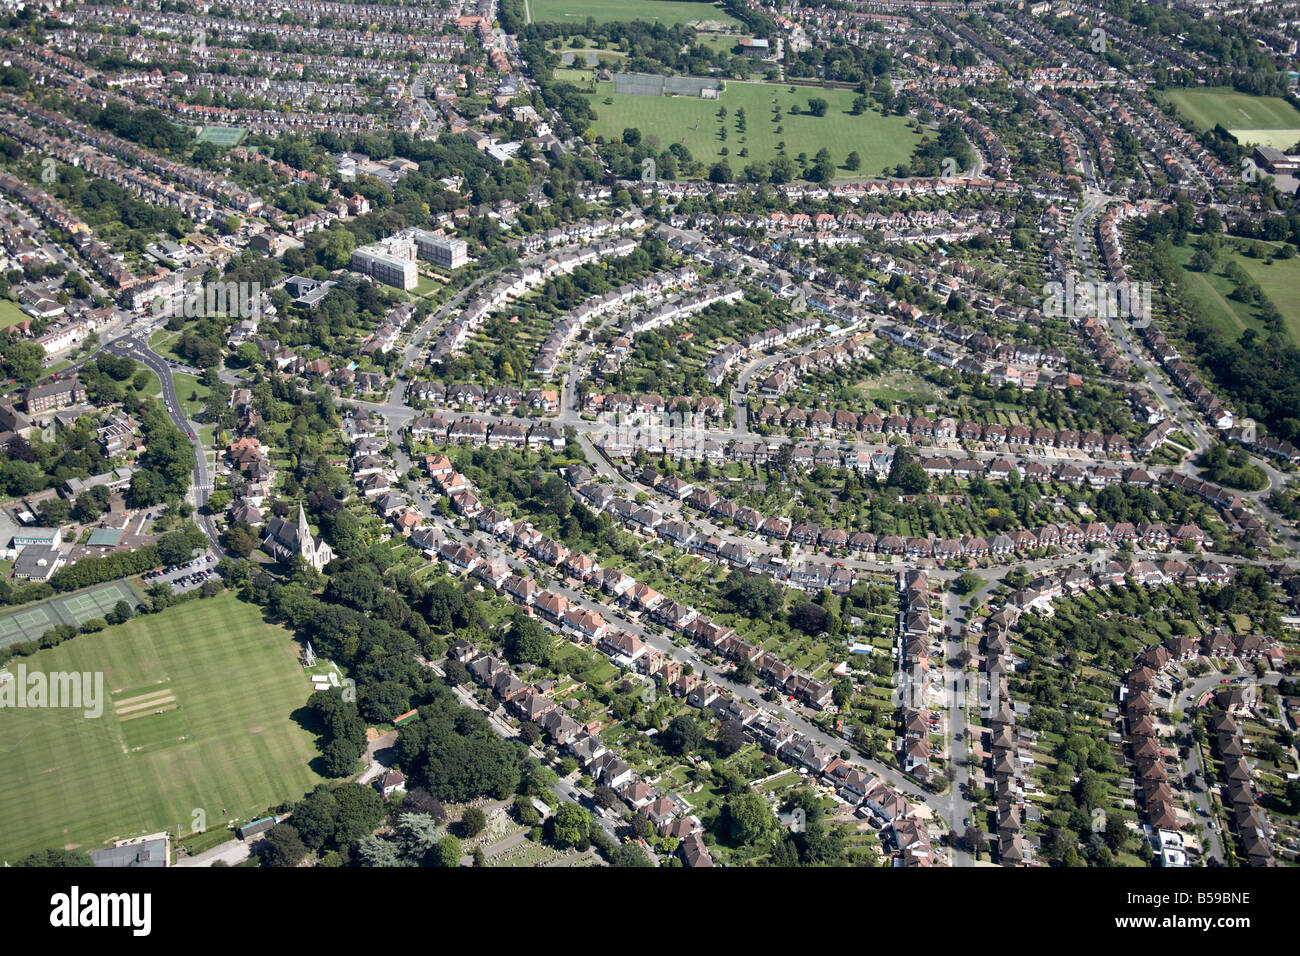 Aerial view south east of Southgate Cricket Club Glound suburban houses Morton Way Waterfall Road Minchenden Crescent London N14 Stock Photo